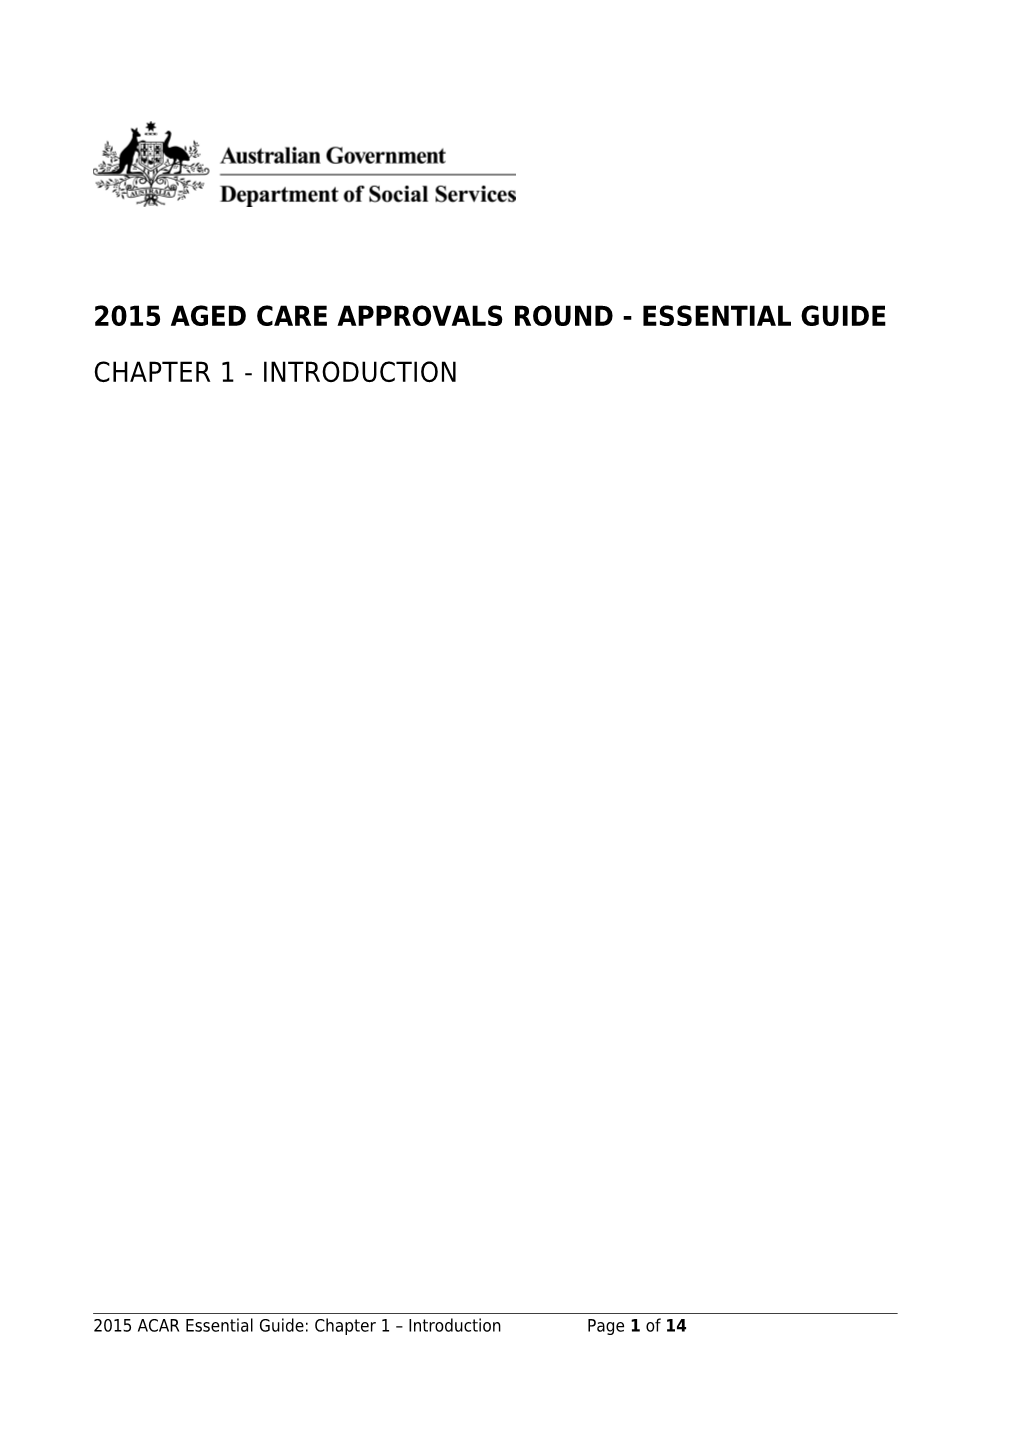 2015Aged Care Approvals Round - Essential Guide